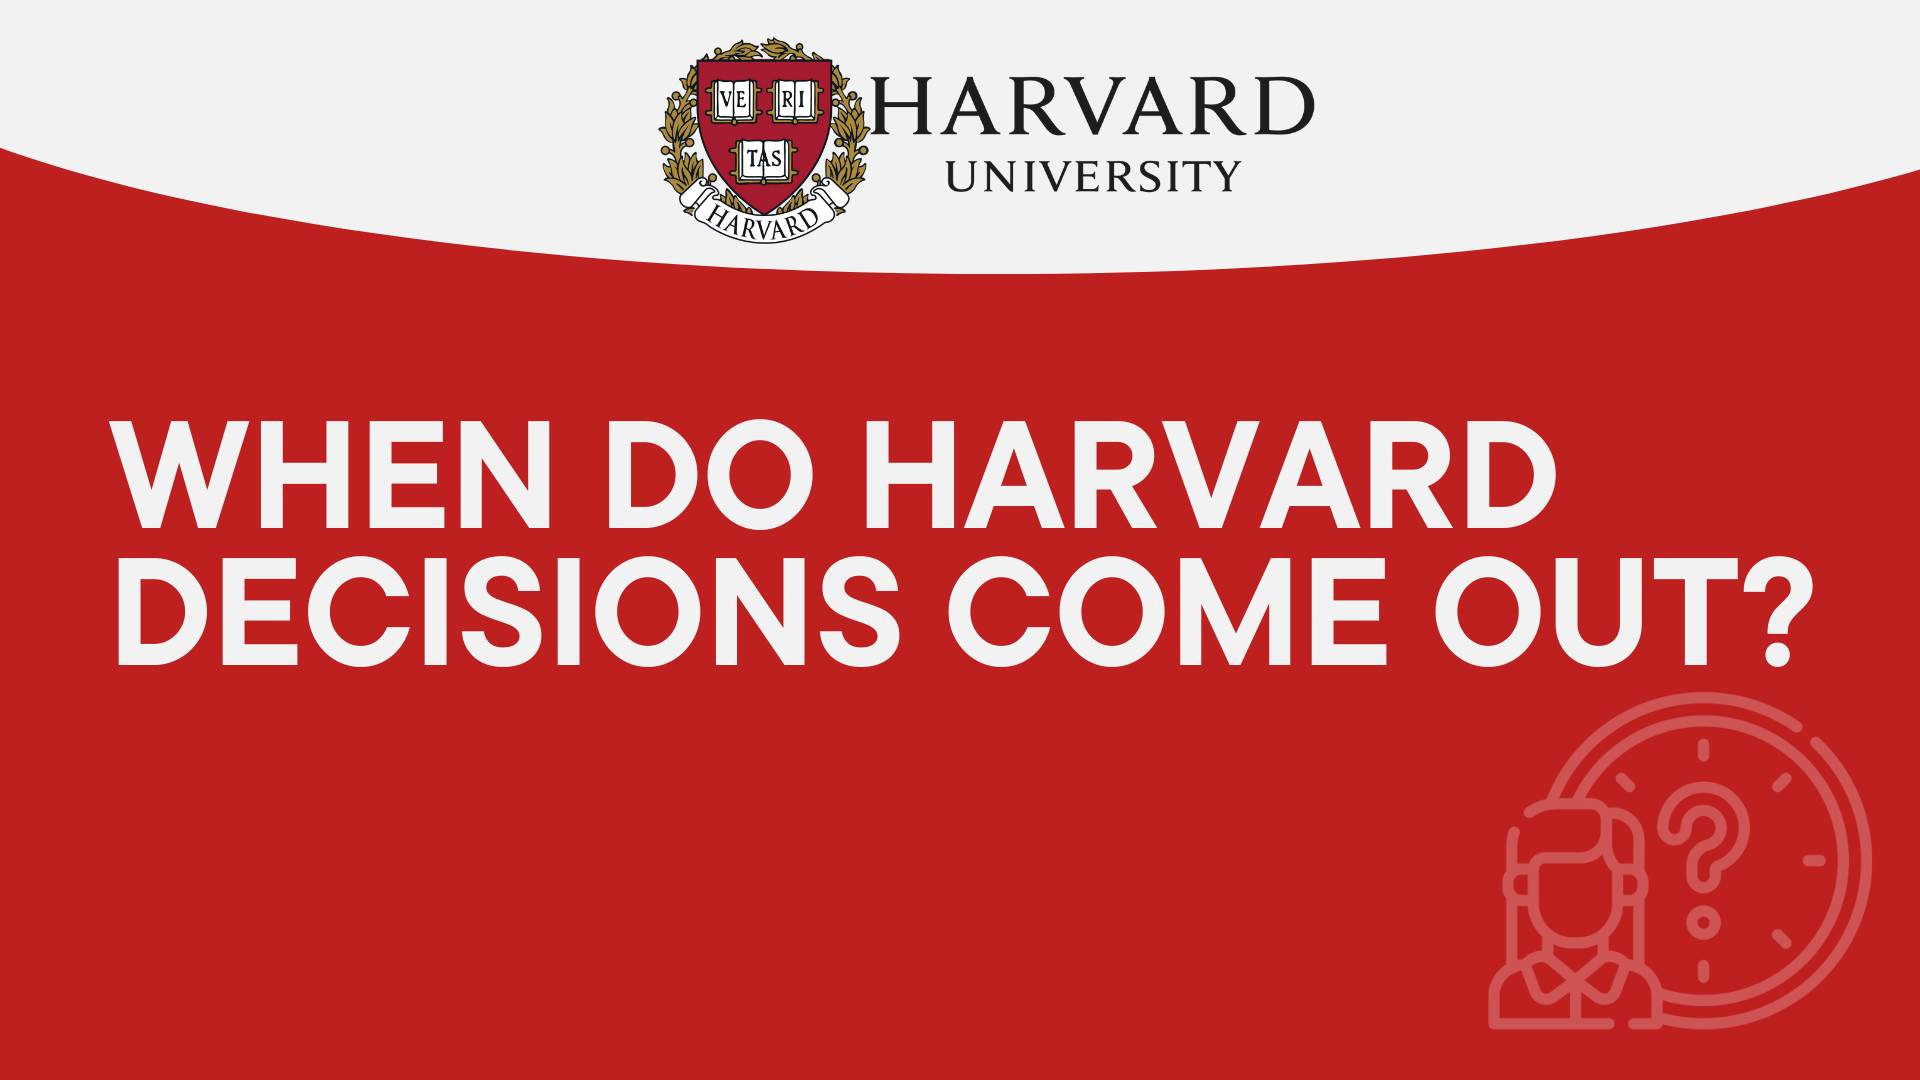 When Do Harvard Decisions Come Out? Exact Date Educatoroid